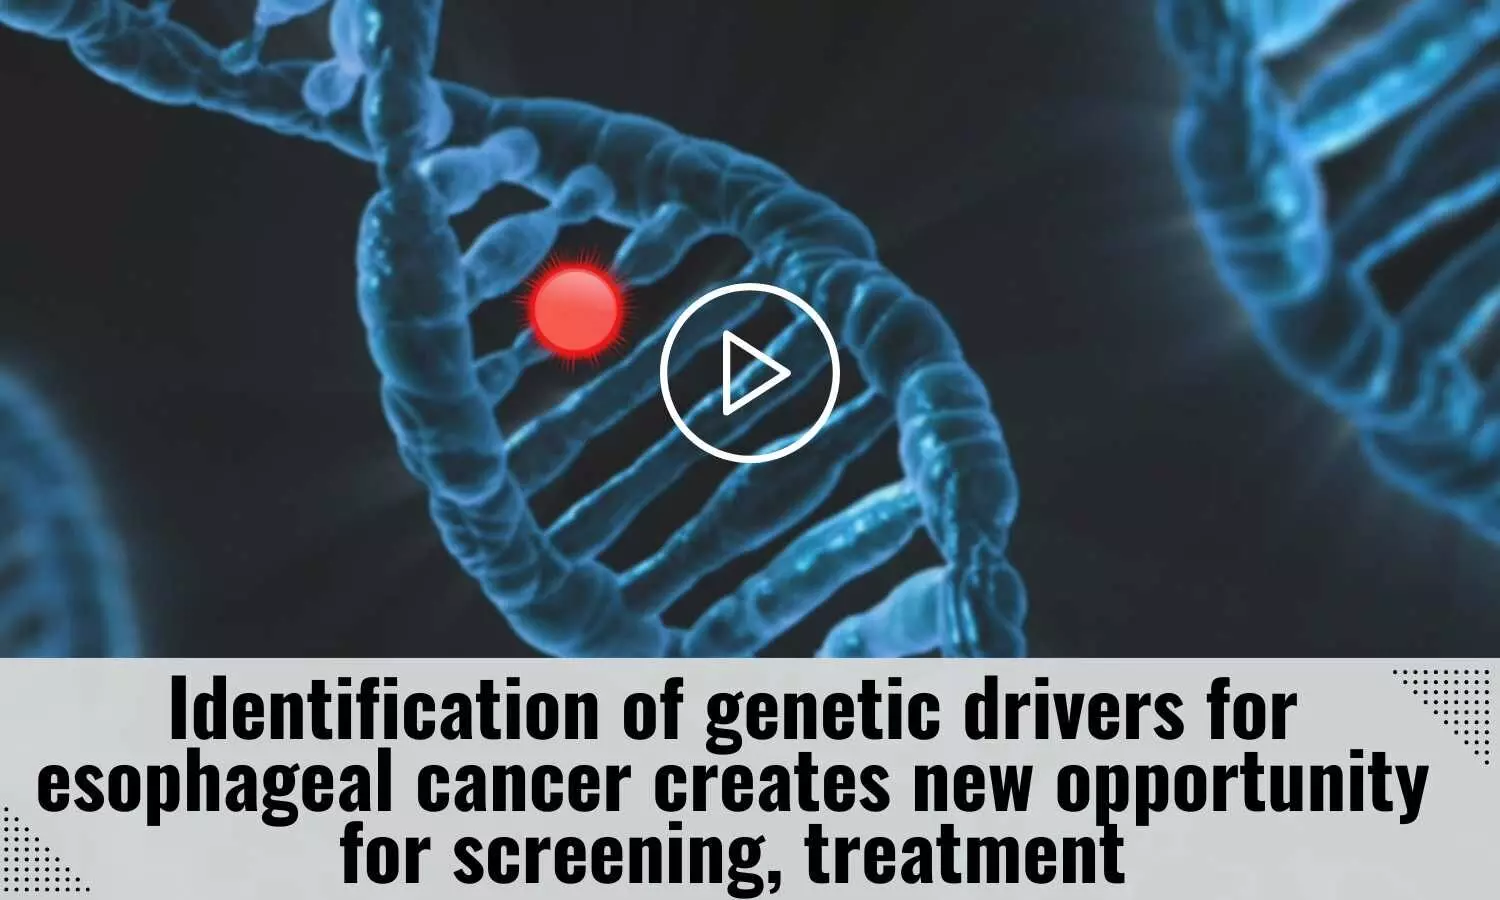 Identification of genetic drivers for esophageal cancer creates new opportunity for screening, treatment